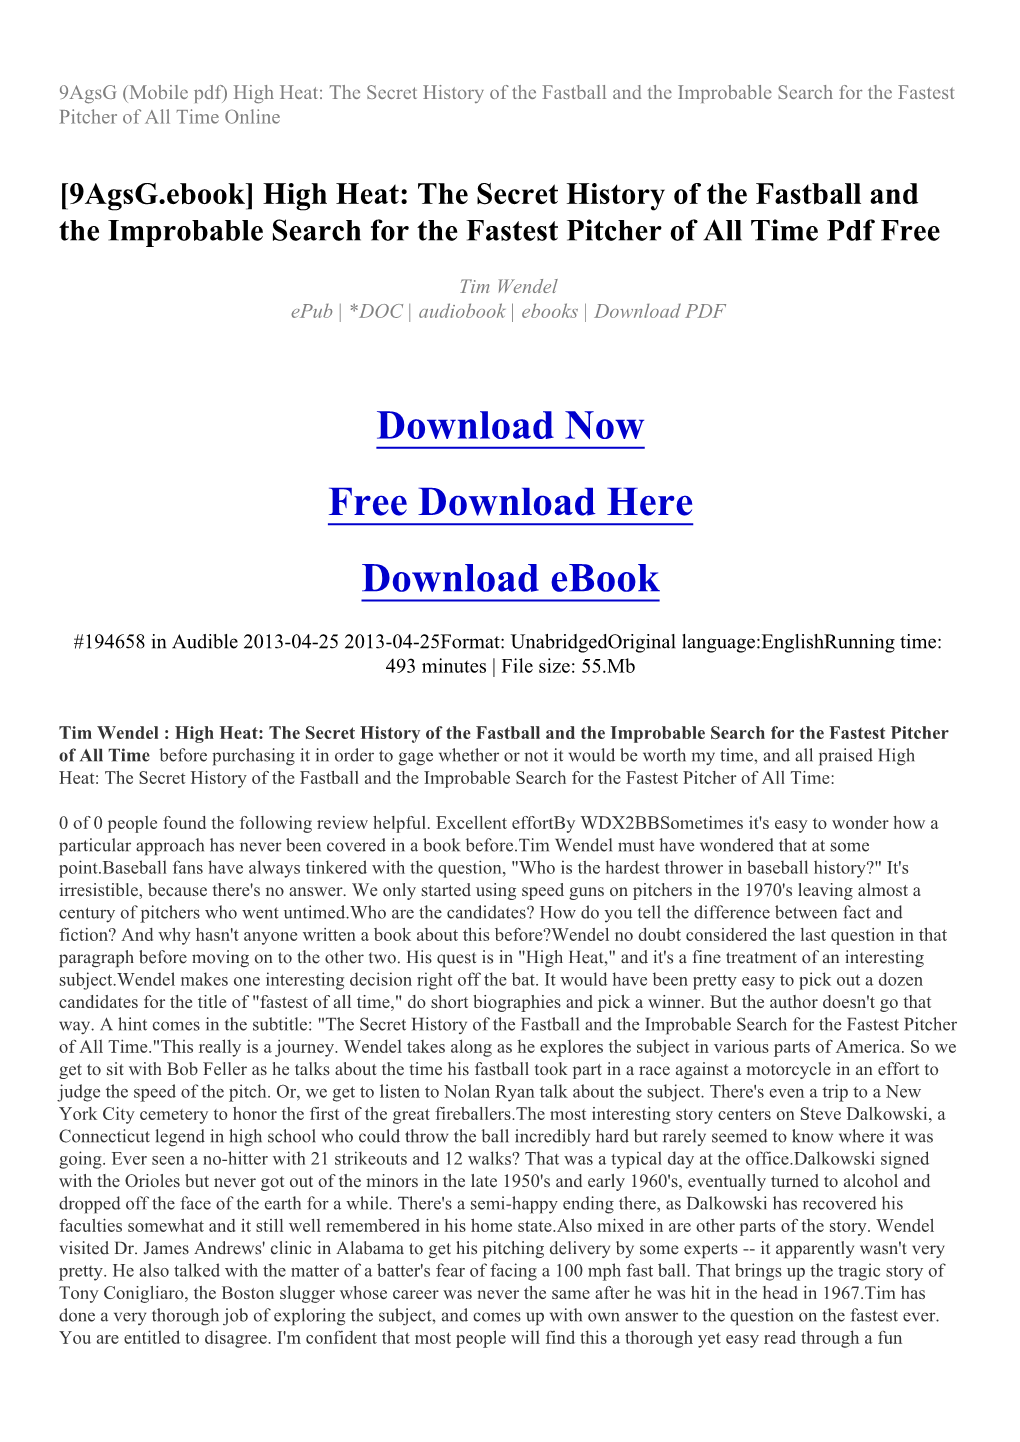 High Heat: the Secret History of the Fastball and the Improbable Search for the Fastest Pitcher of All Time Online